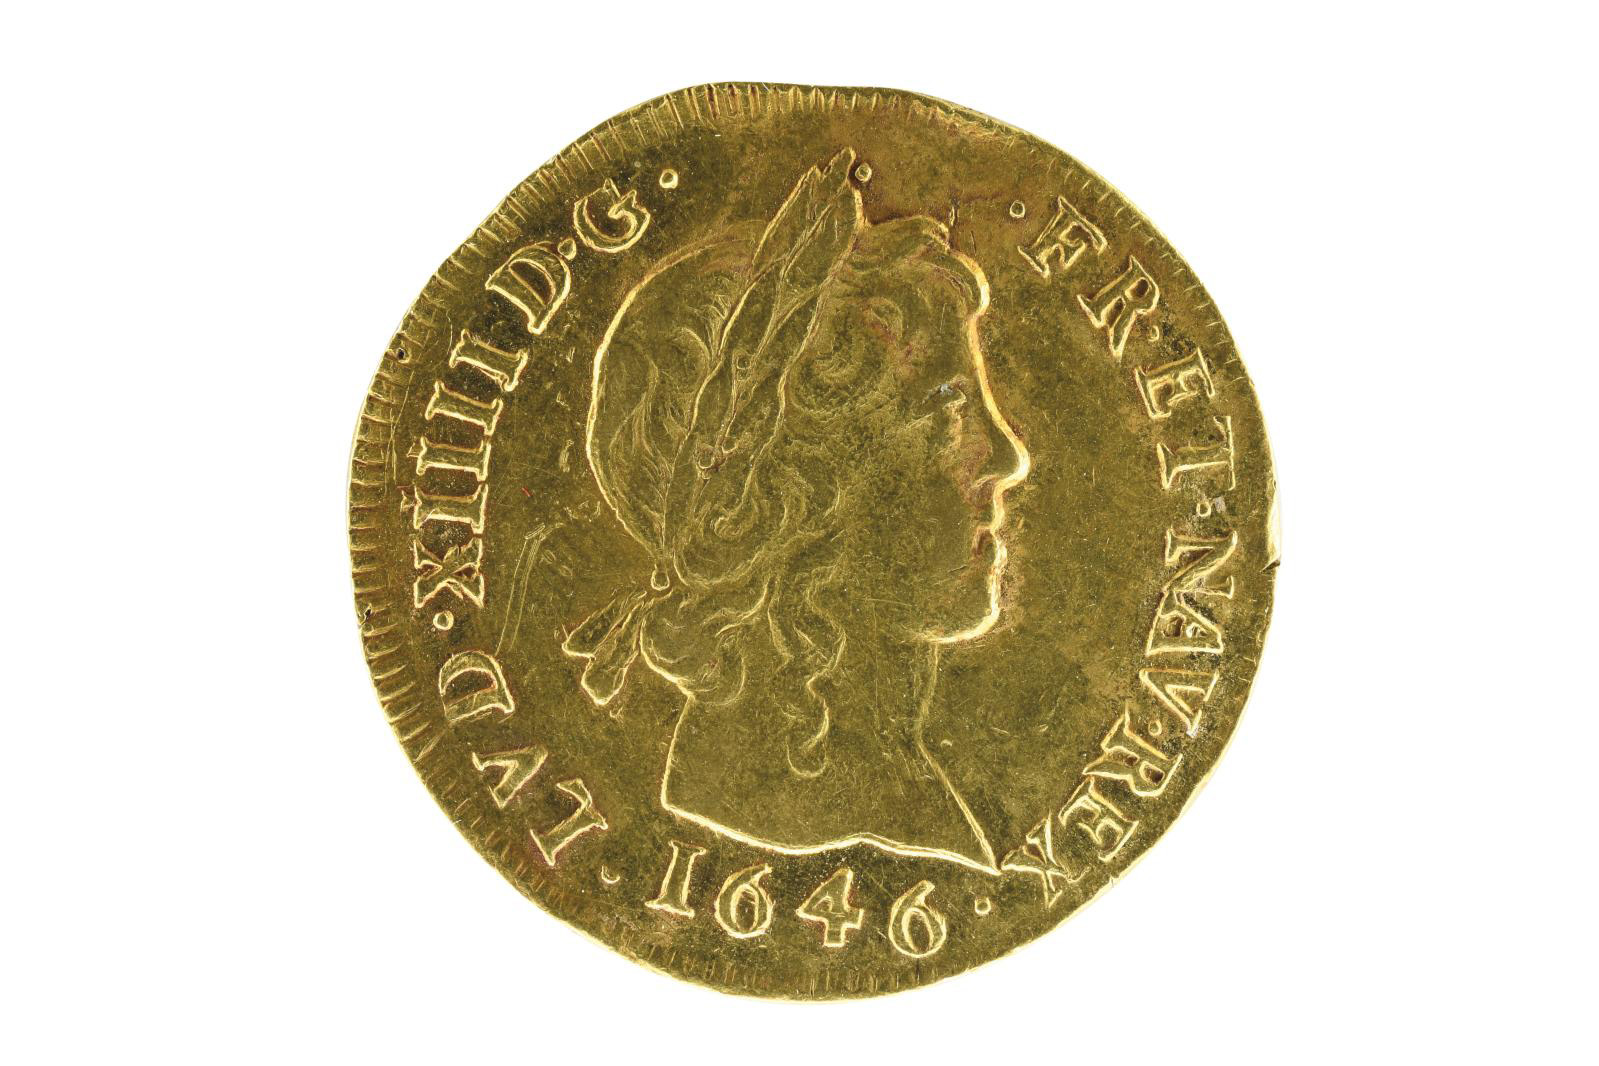 Louis d'or from the Plovezet Treasure